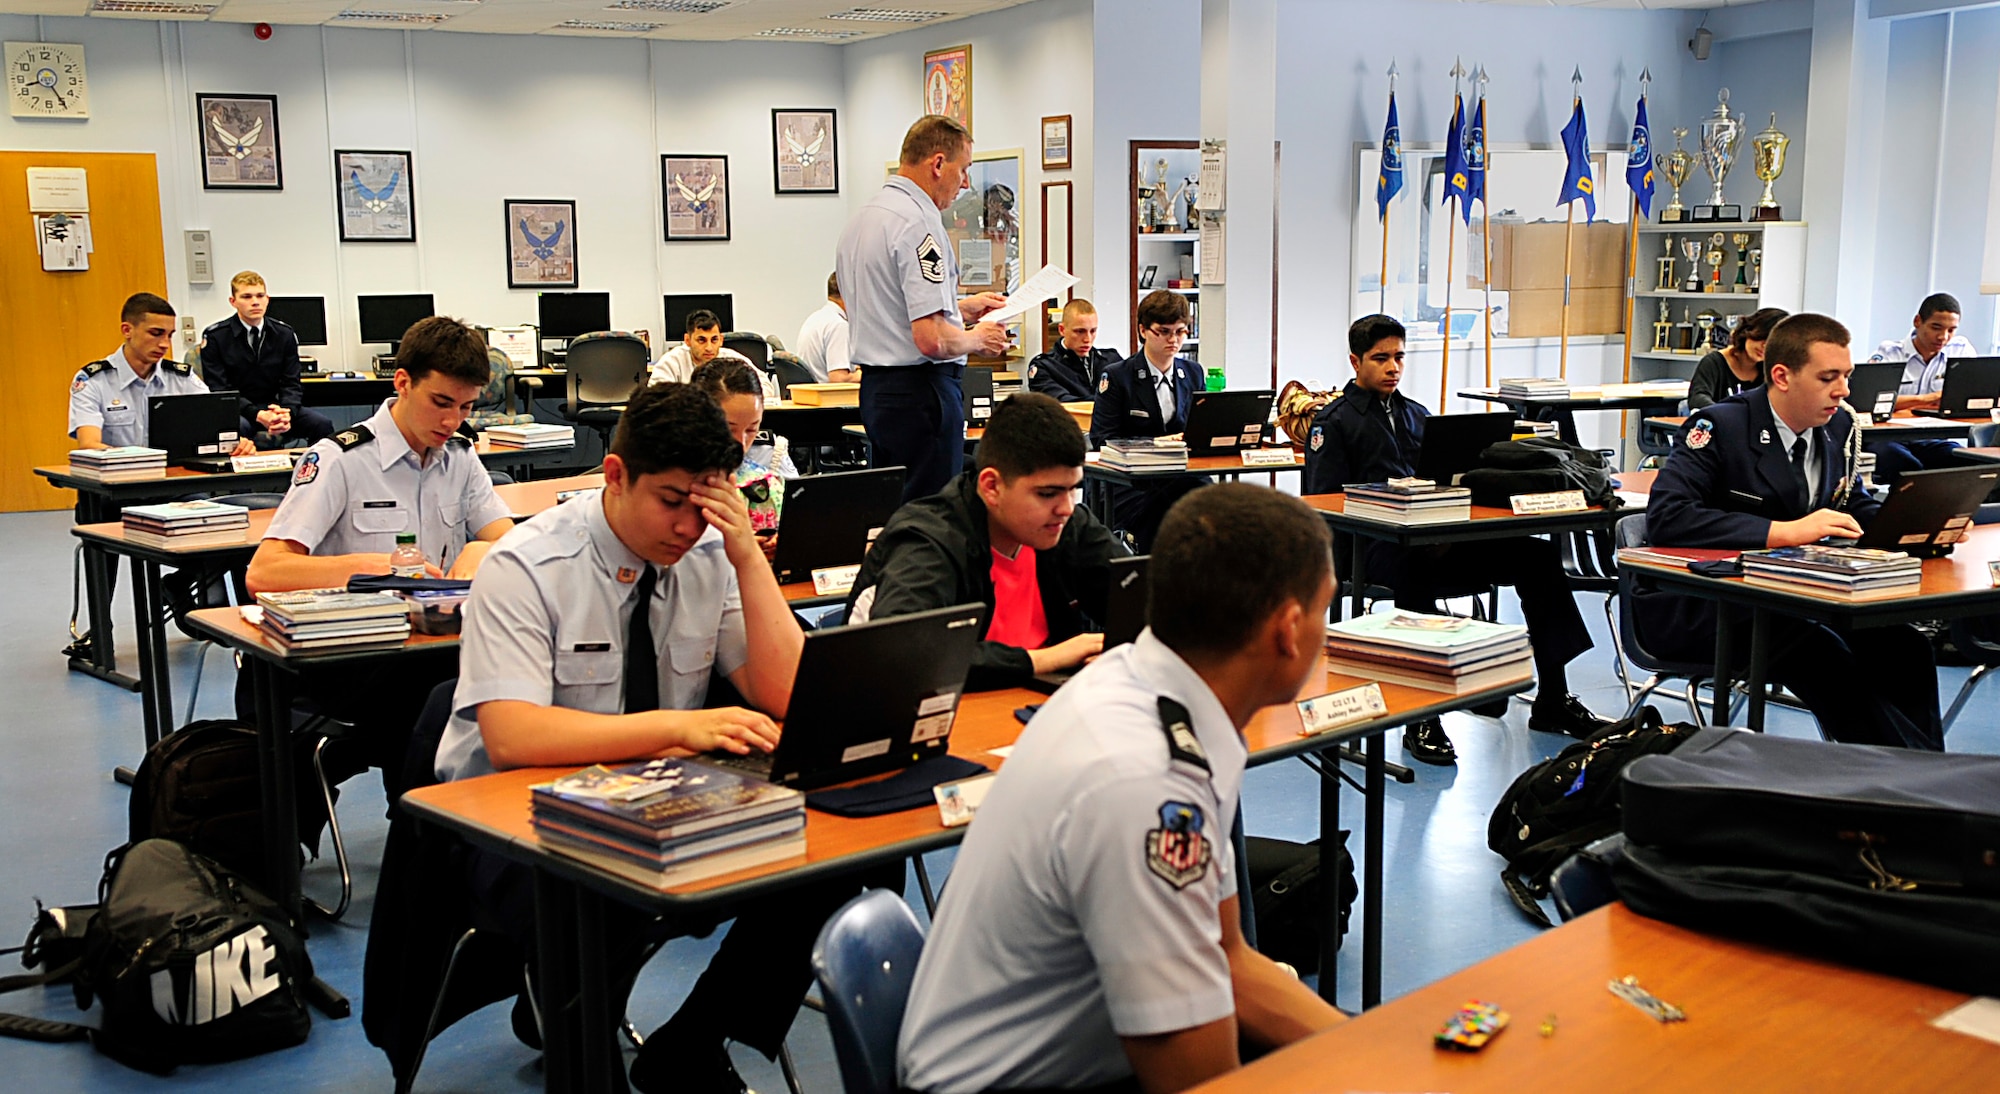 Retired Chief Master Sgt. Stephen Dilda, Ramstein High School Junior Reserve Officer Training Corps instructor, teaches a junior ROTC class May 7, 2015, at Ramstein Air Base, Germany. The Ramstein High School junior ROTC program scored the highest rating of “exceeds standards” during a recent inspection and was selected to receive the 2014-2015 Air Force junior ROTC Outstanding Organization Award. (U.S. Air Force photo/Airman 1st Class Larissa Greatwood)